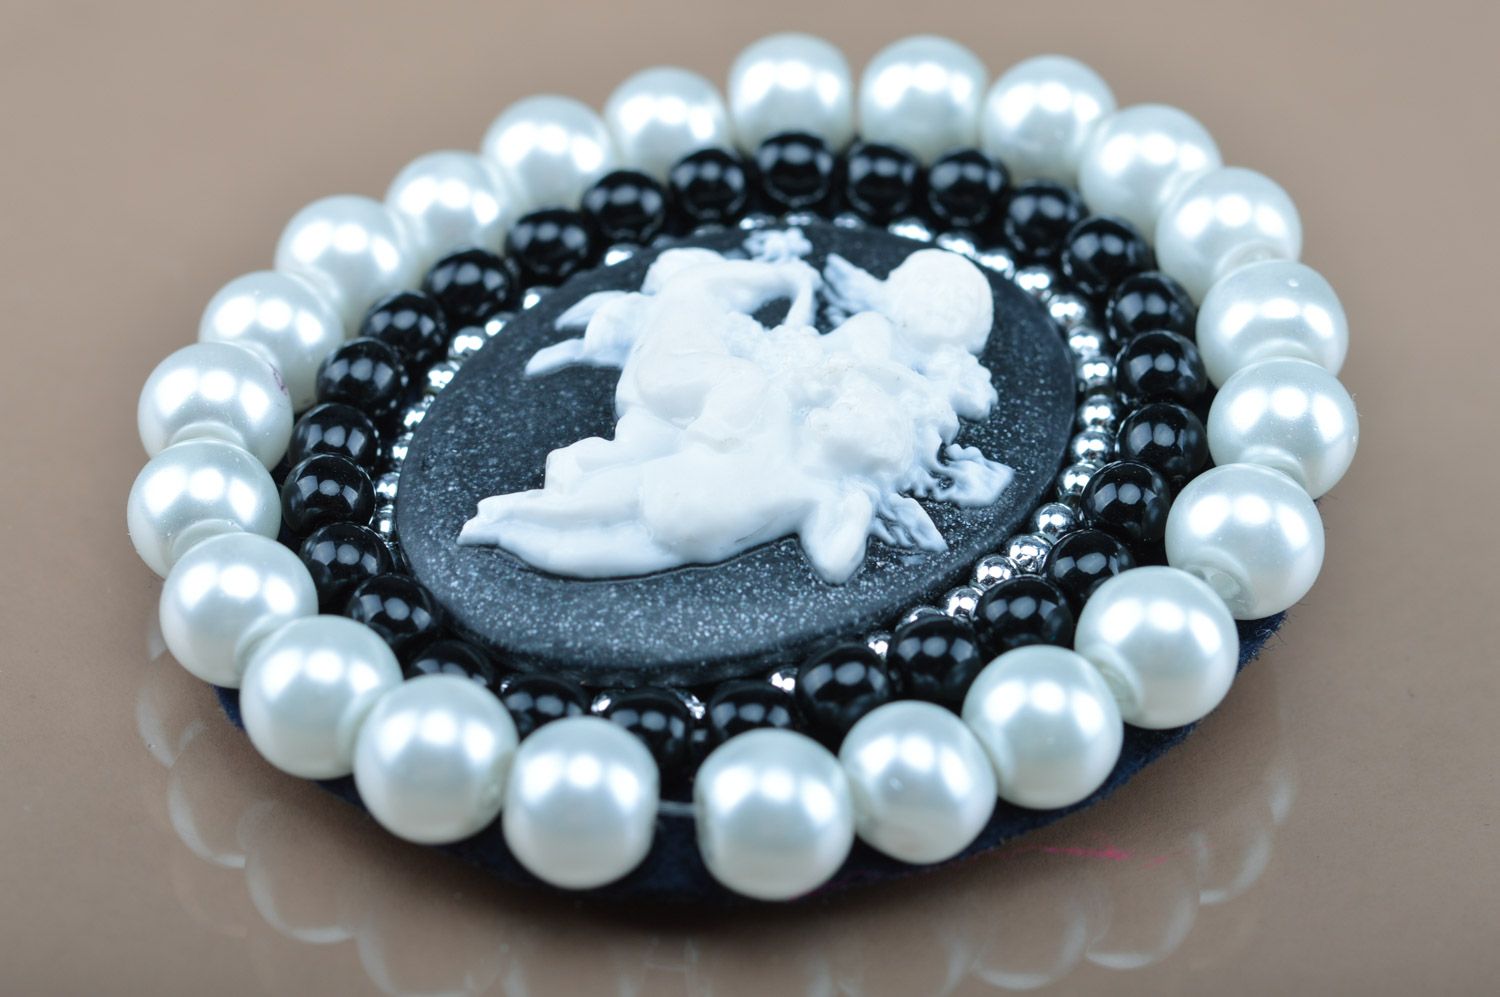 Handmade felt brooch with cameo embroidered with seed and pearl-like beads photo 2